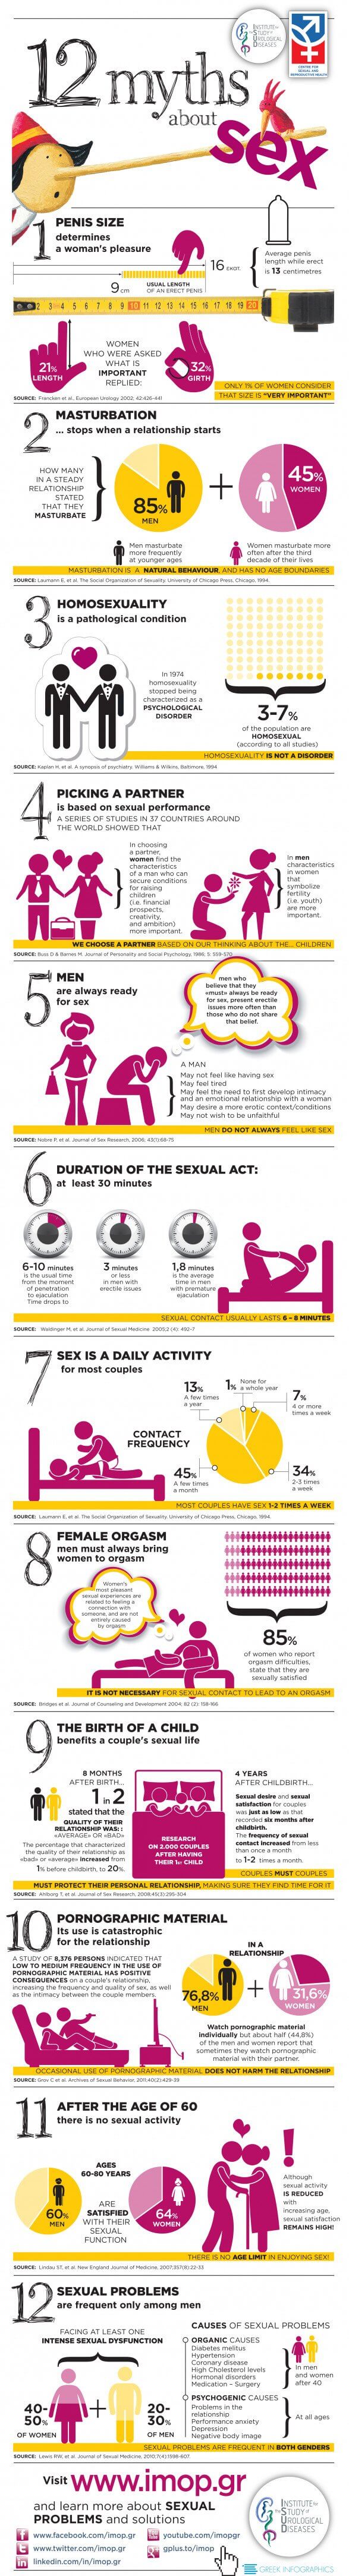 Sex Myths Infographic